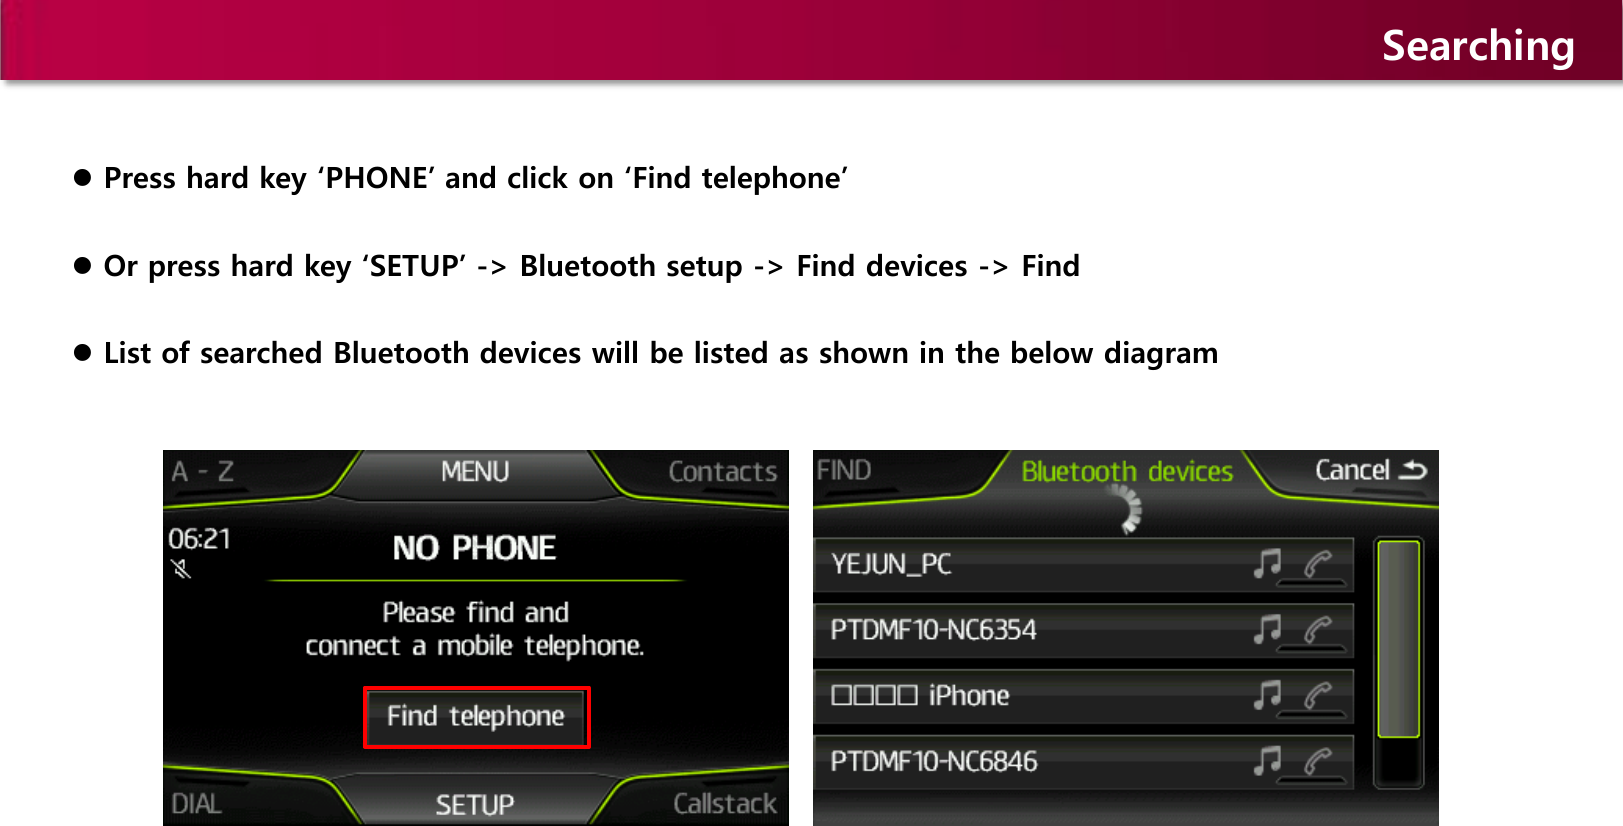 Searching  Press hard key ‘PHONE’ and click on ‘Find telephone’   Or press hard key ‘SETUP’ -&gt; Bluetooth setup -&gt; Find devices -&gt; Find  List of searched Bluetooth devices will be listed as shown in the below diagram  